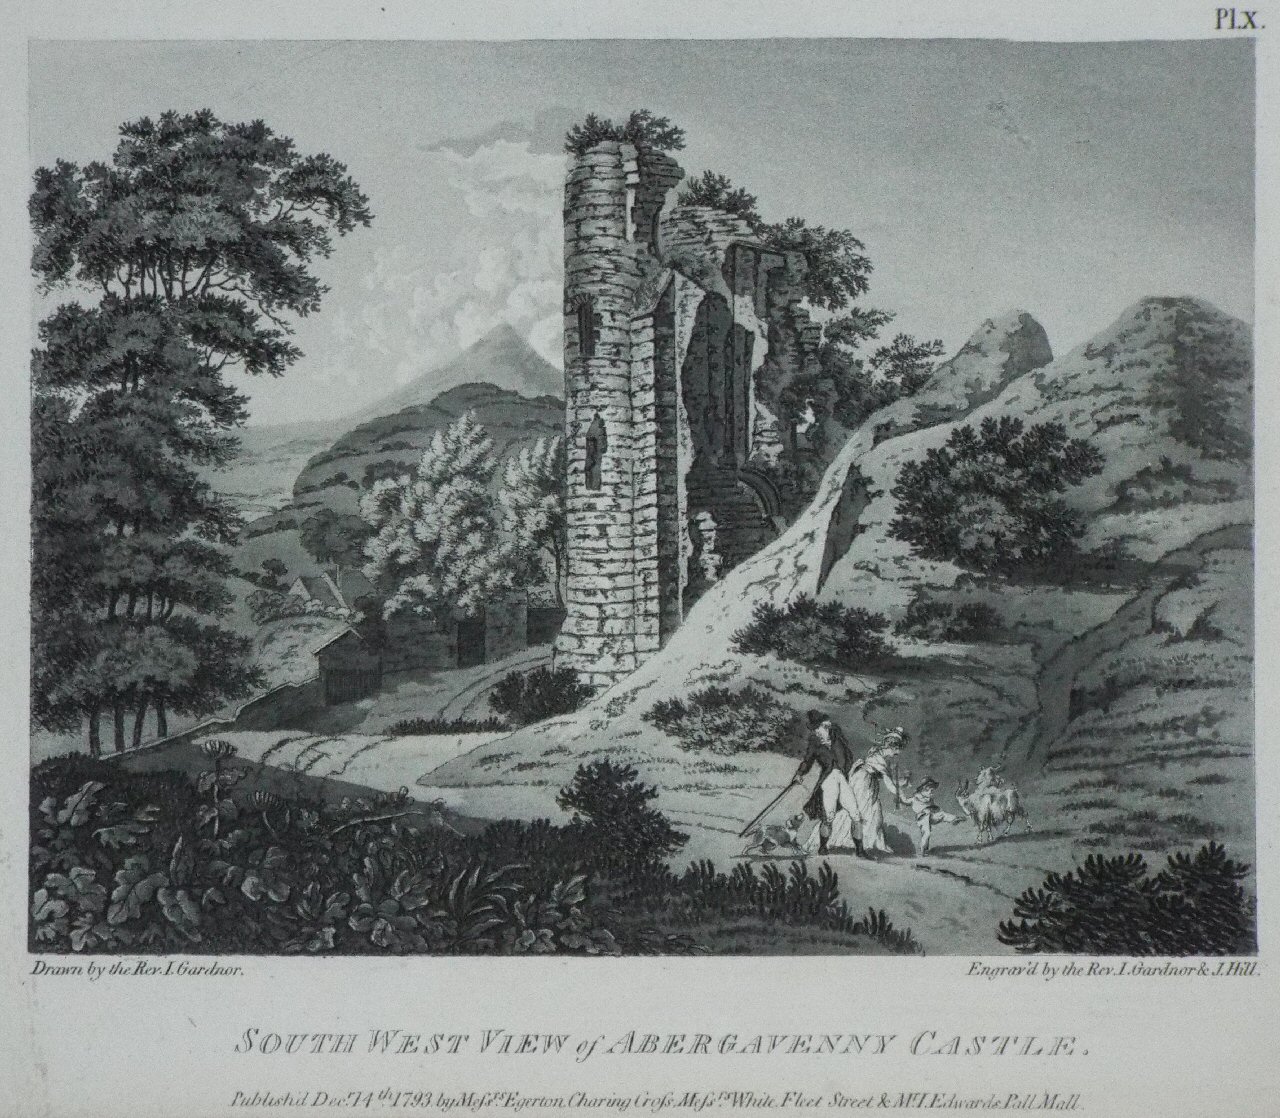 Aquatint - South West View of Abergavenny Castle. - Gardner